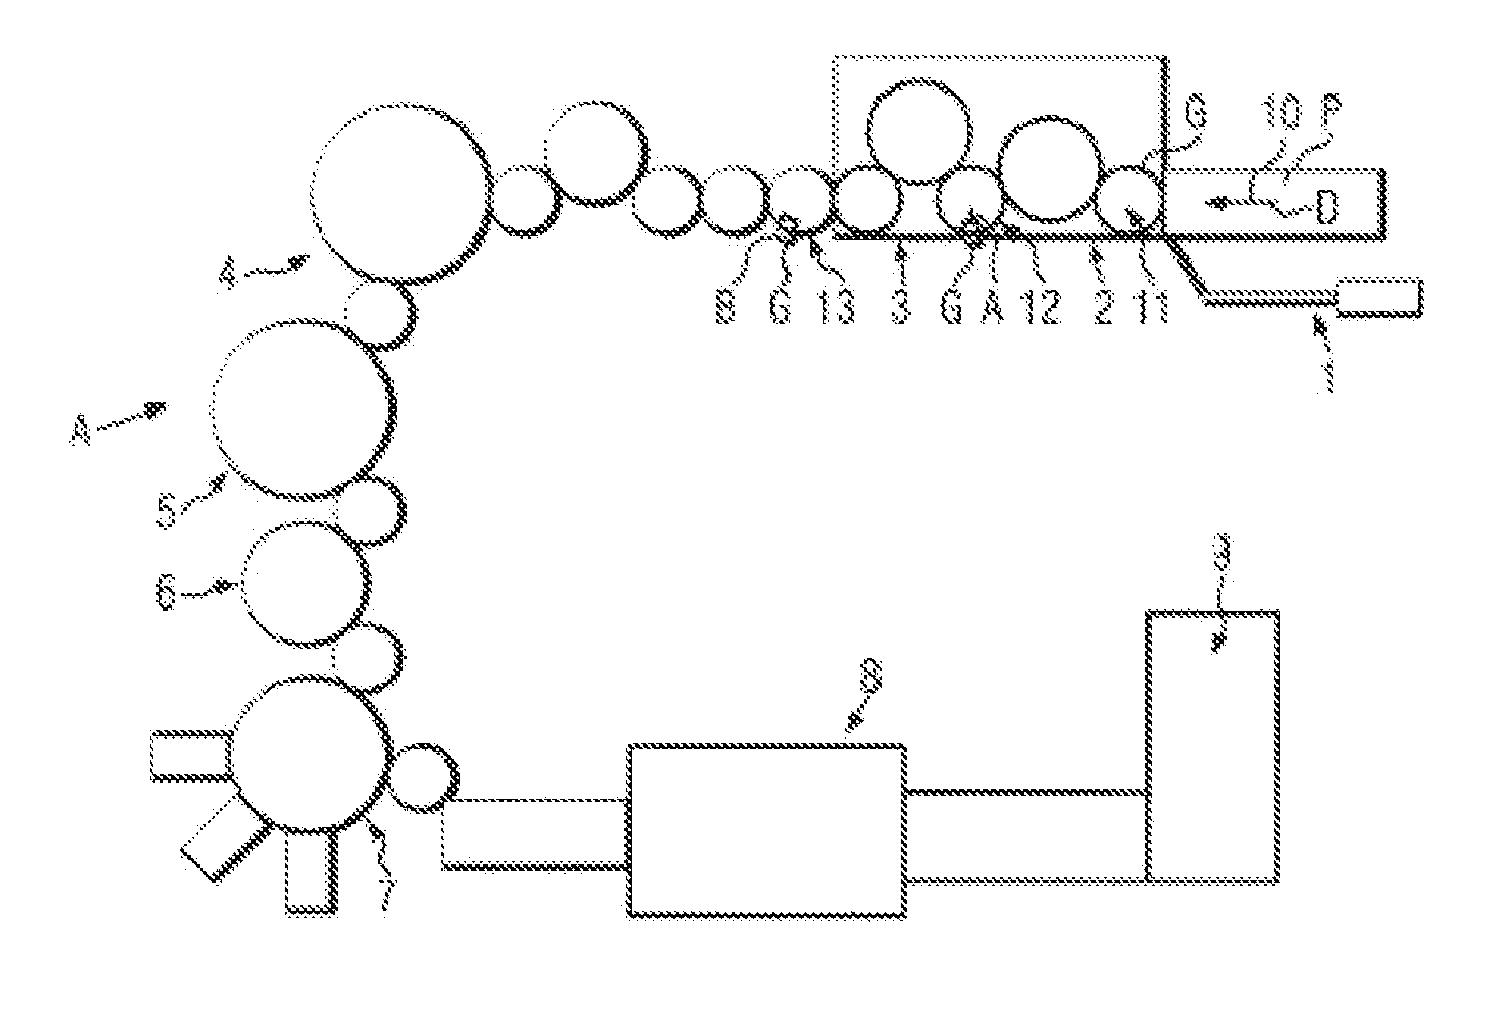 Container treatment machine and method of treating containers